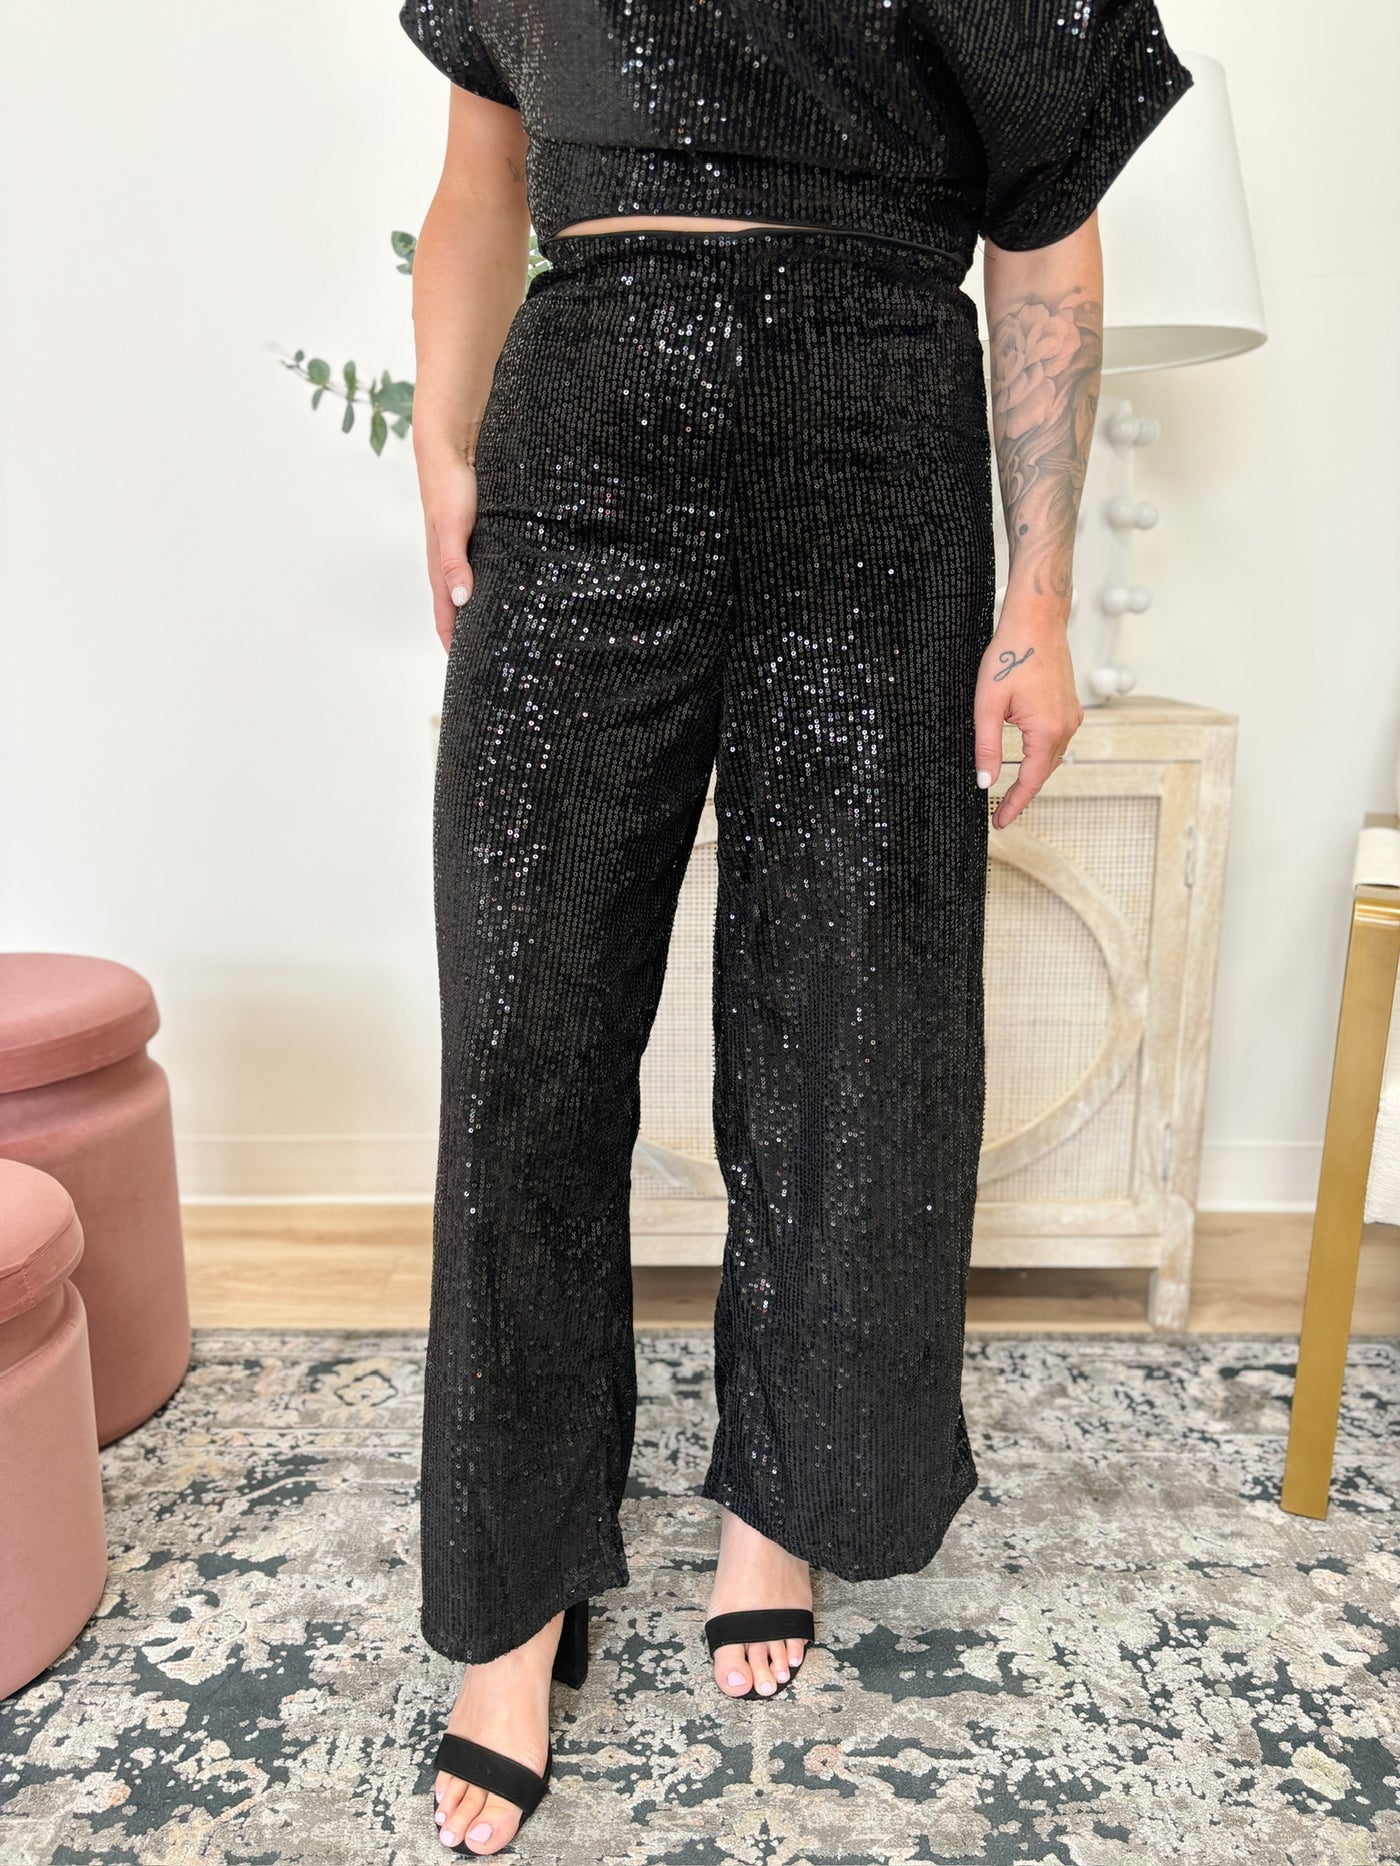 The Sequin Flared Leg Pants in Black